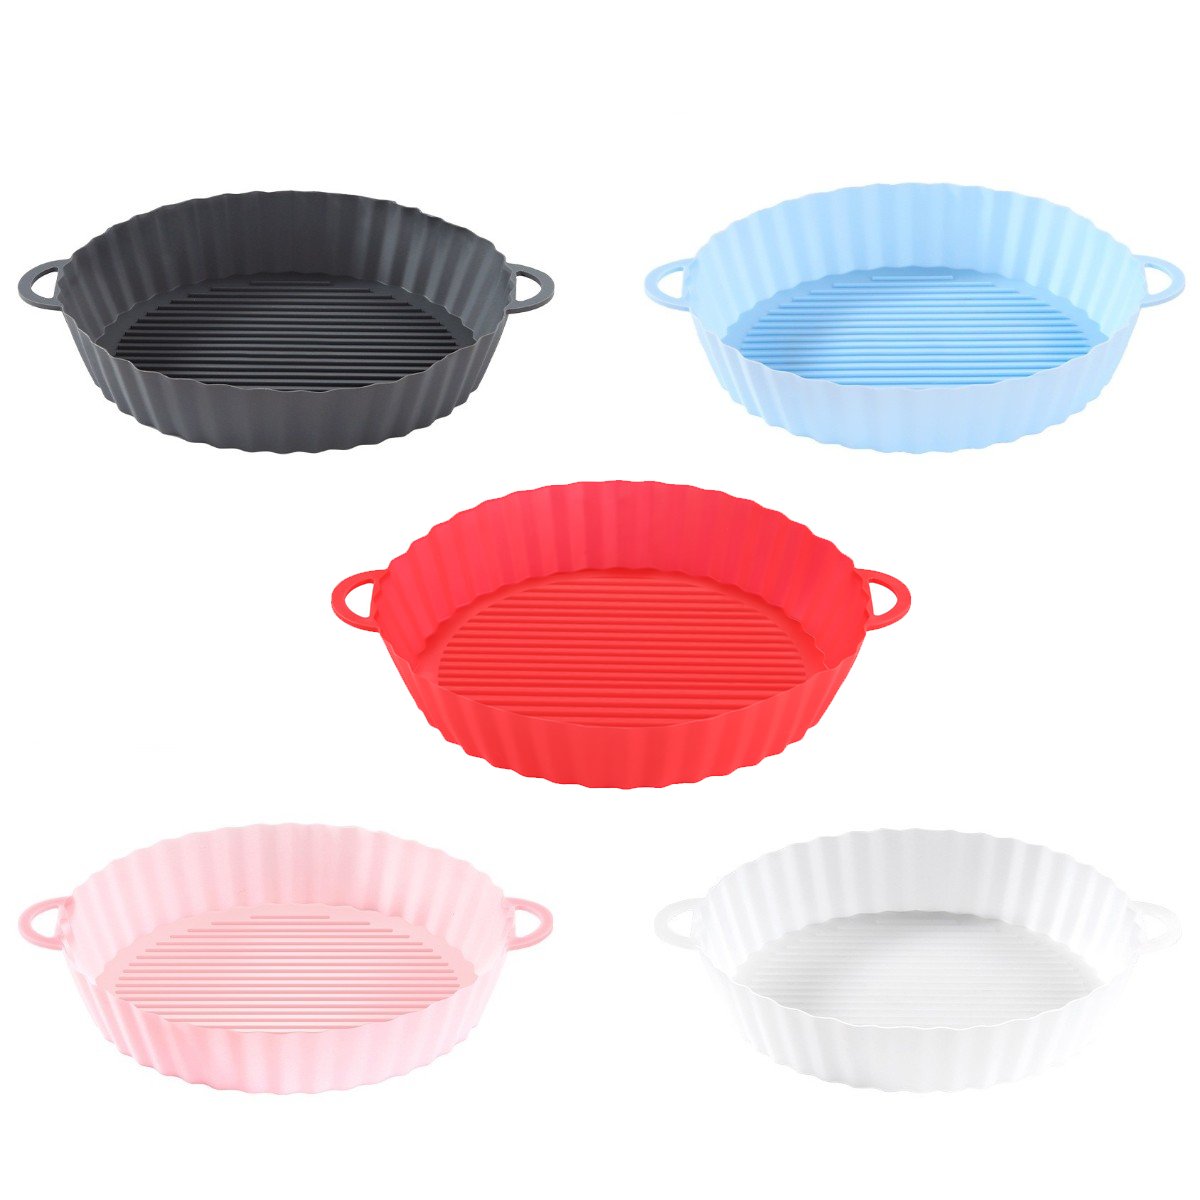 Air Fryer Silicone Baking Tray🌷Buy 2 Get 1 Free